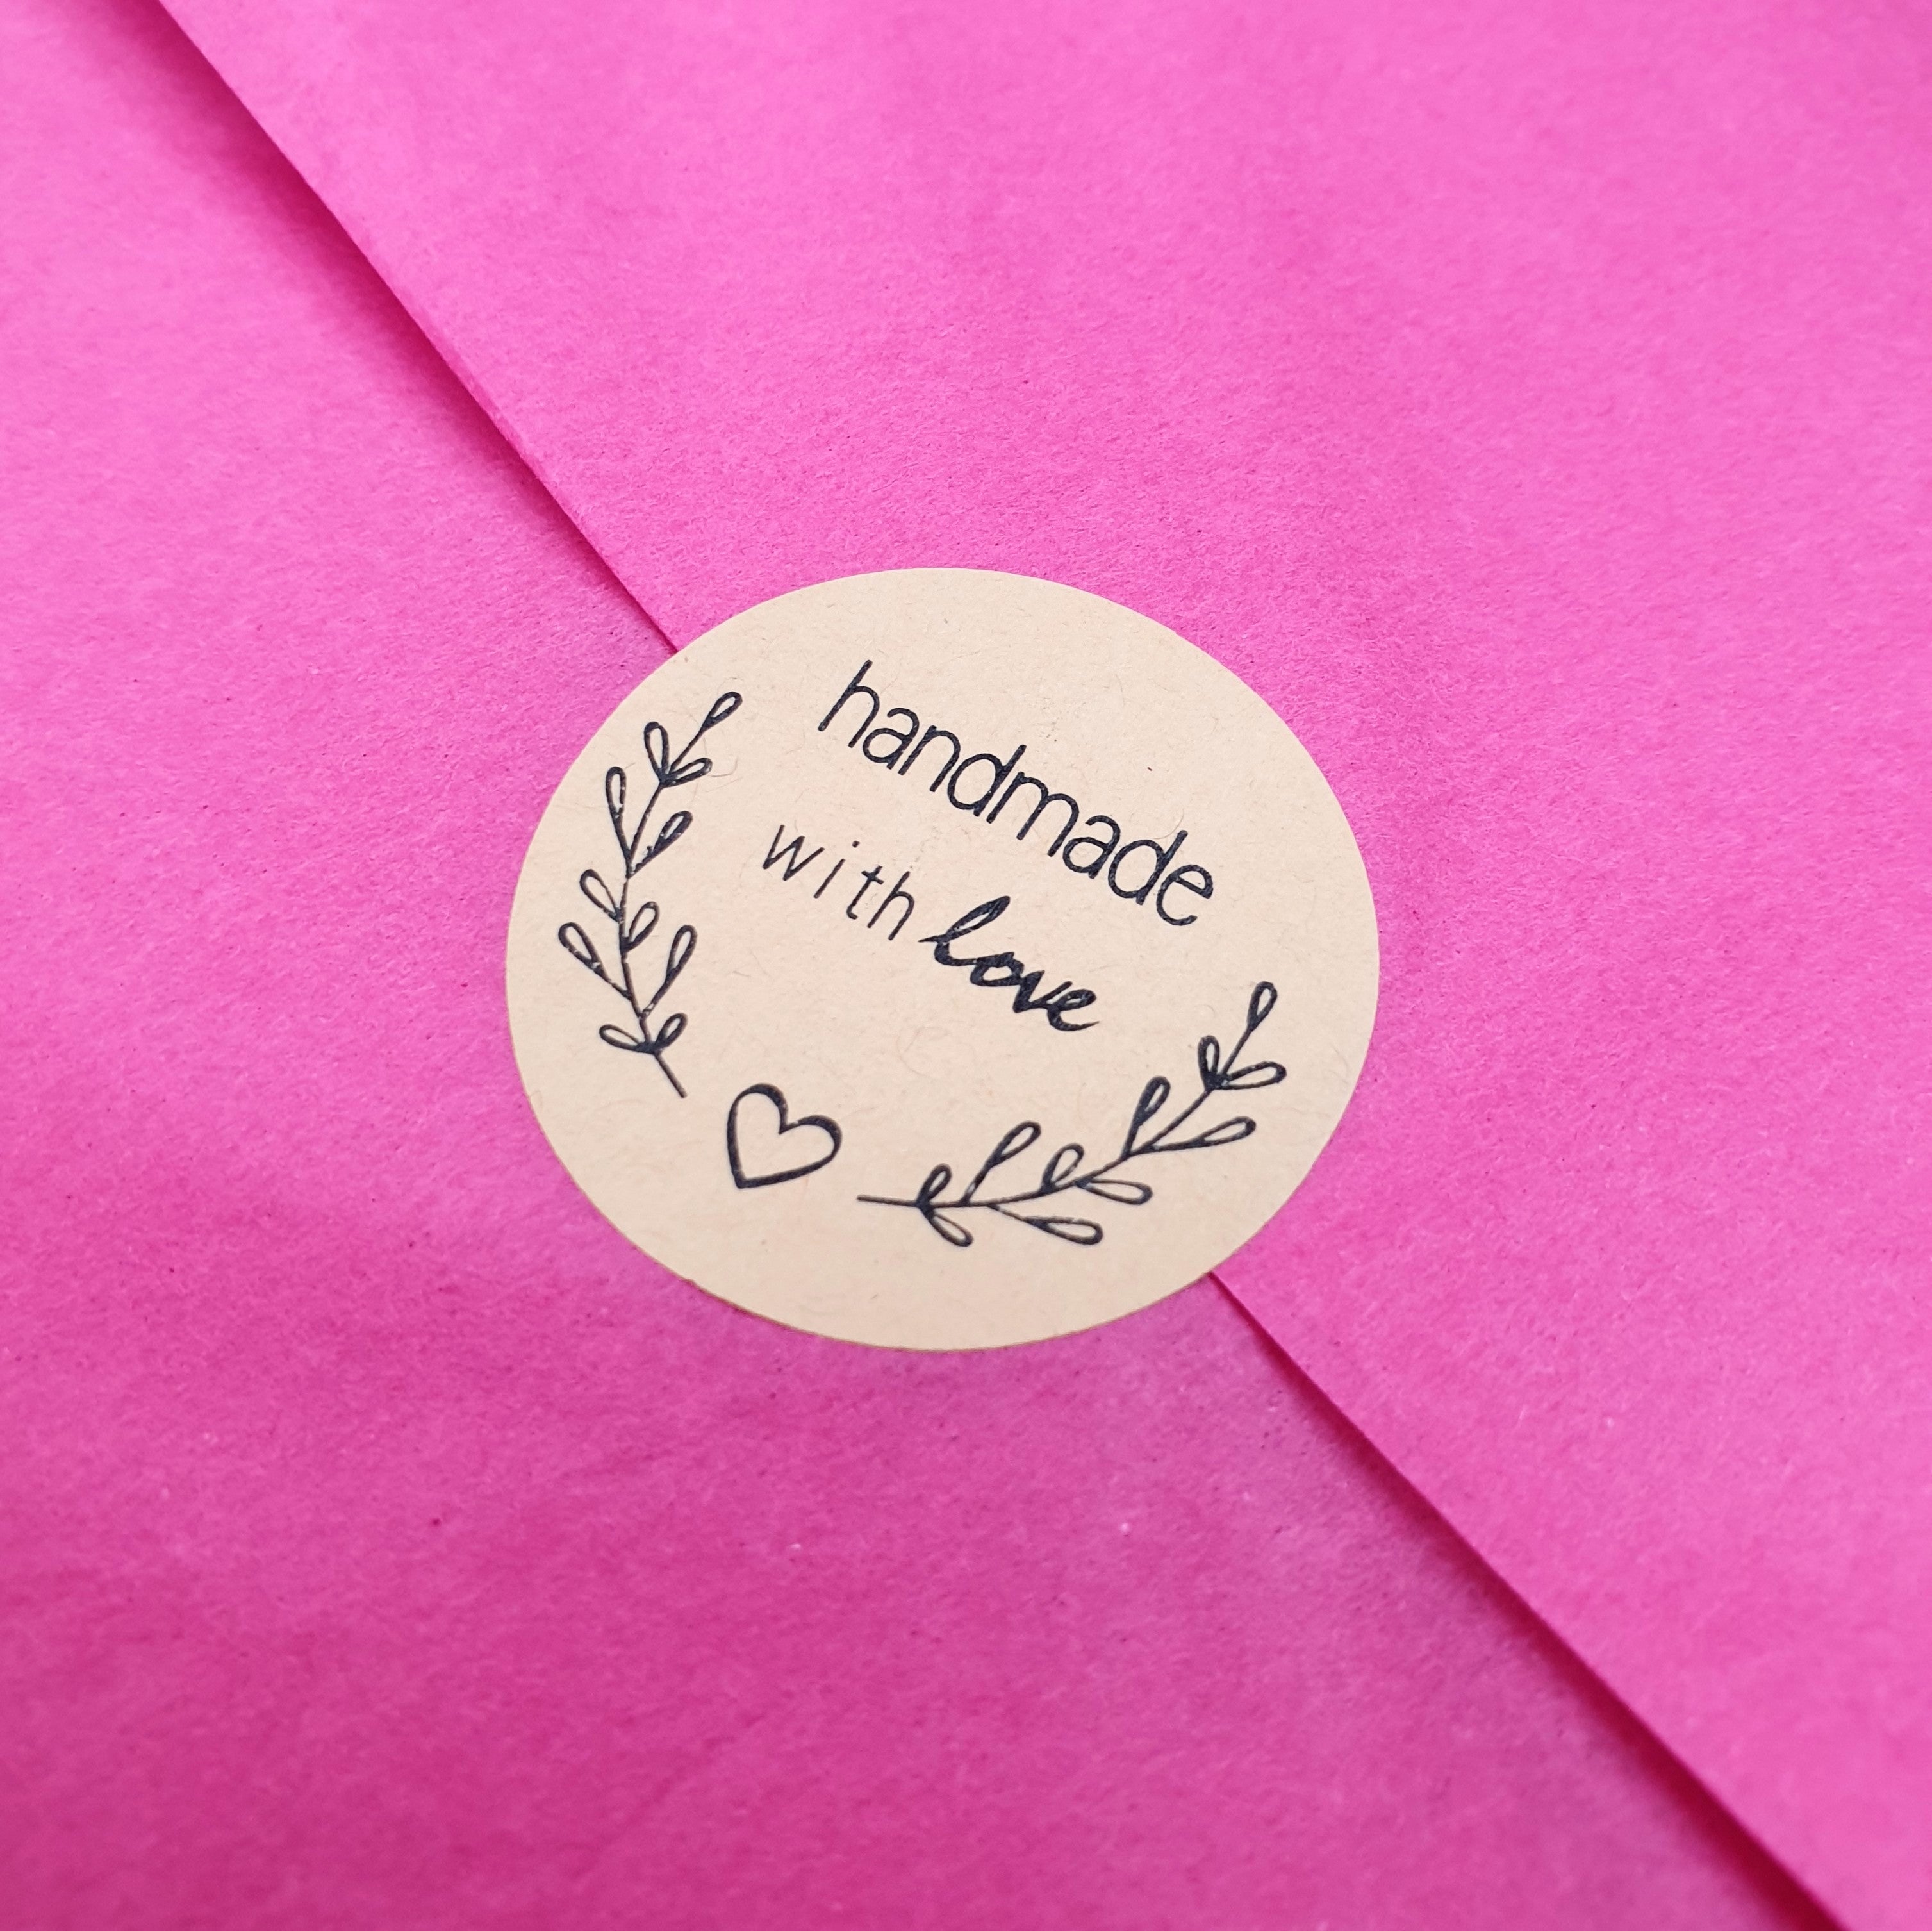 GIFT WRAP with Message - Send a Wrapped Gift with Love